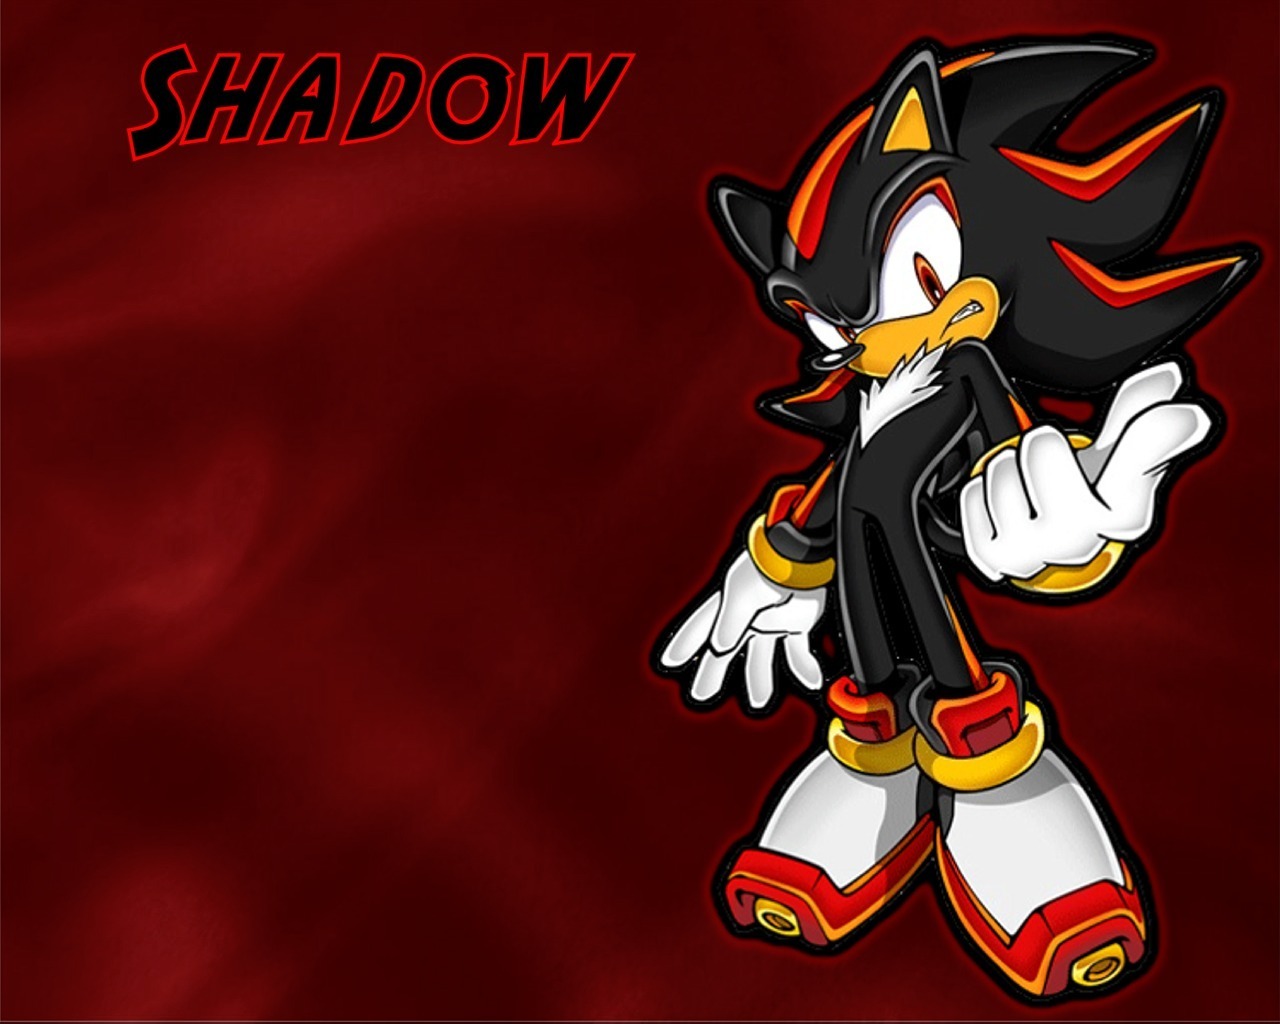 Random Wallpapers i have made   Sonic Characters Fan Art 1587001 1280x1024